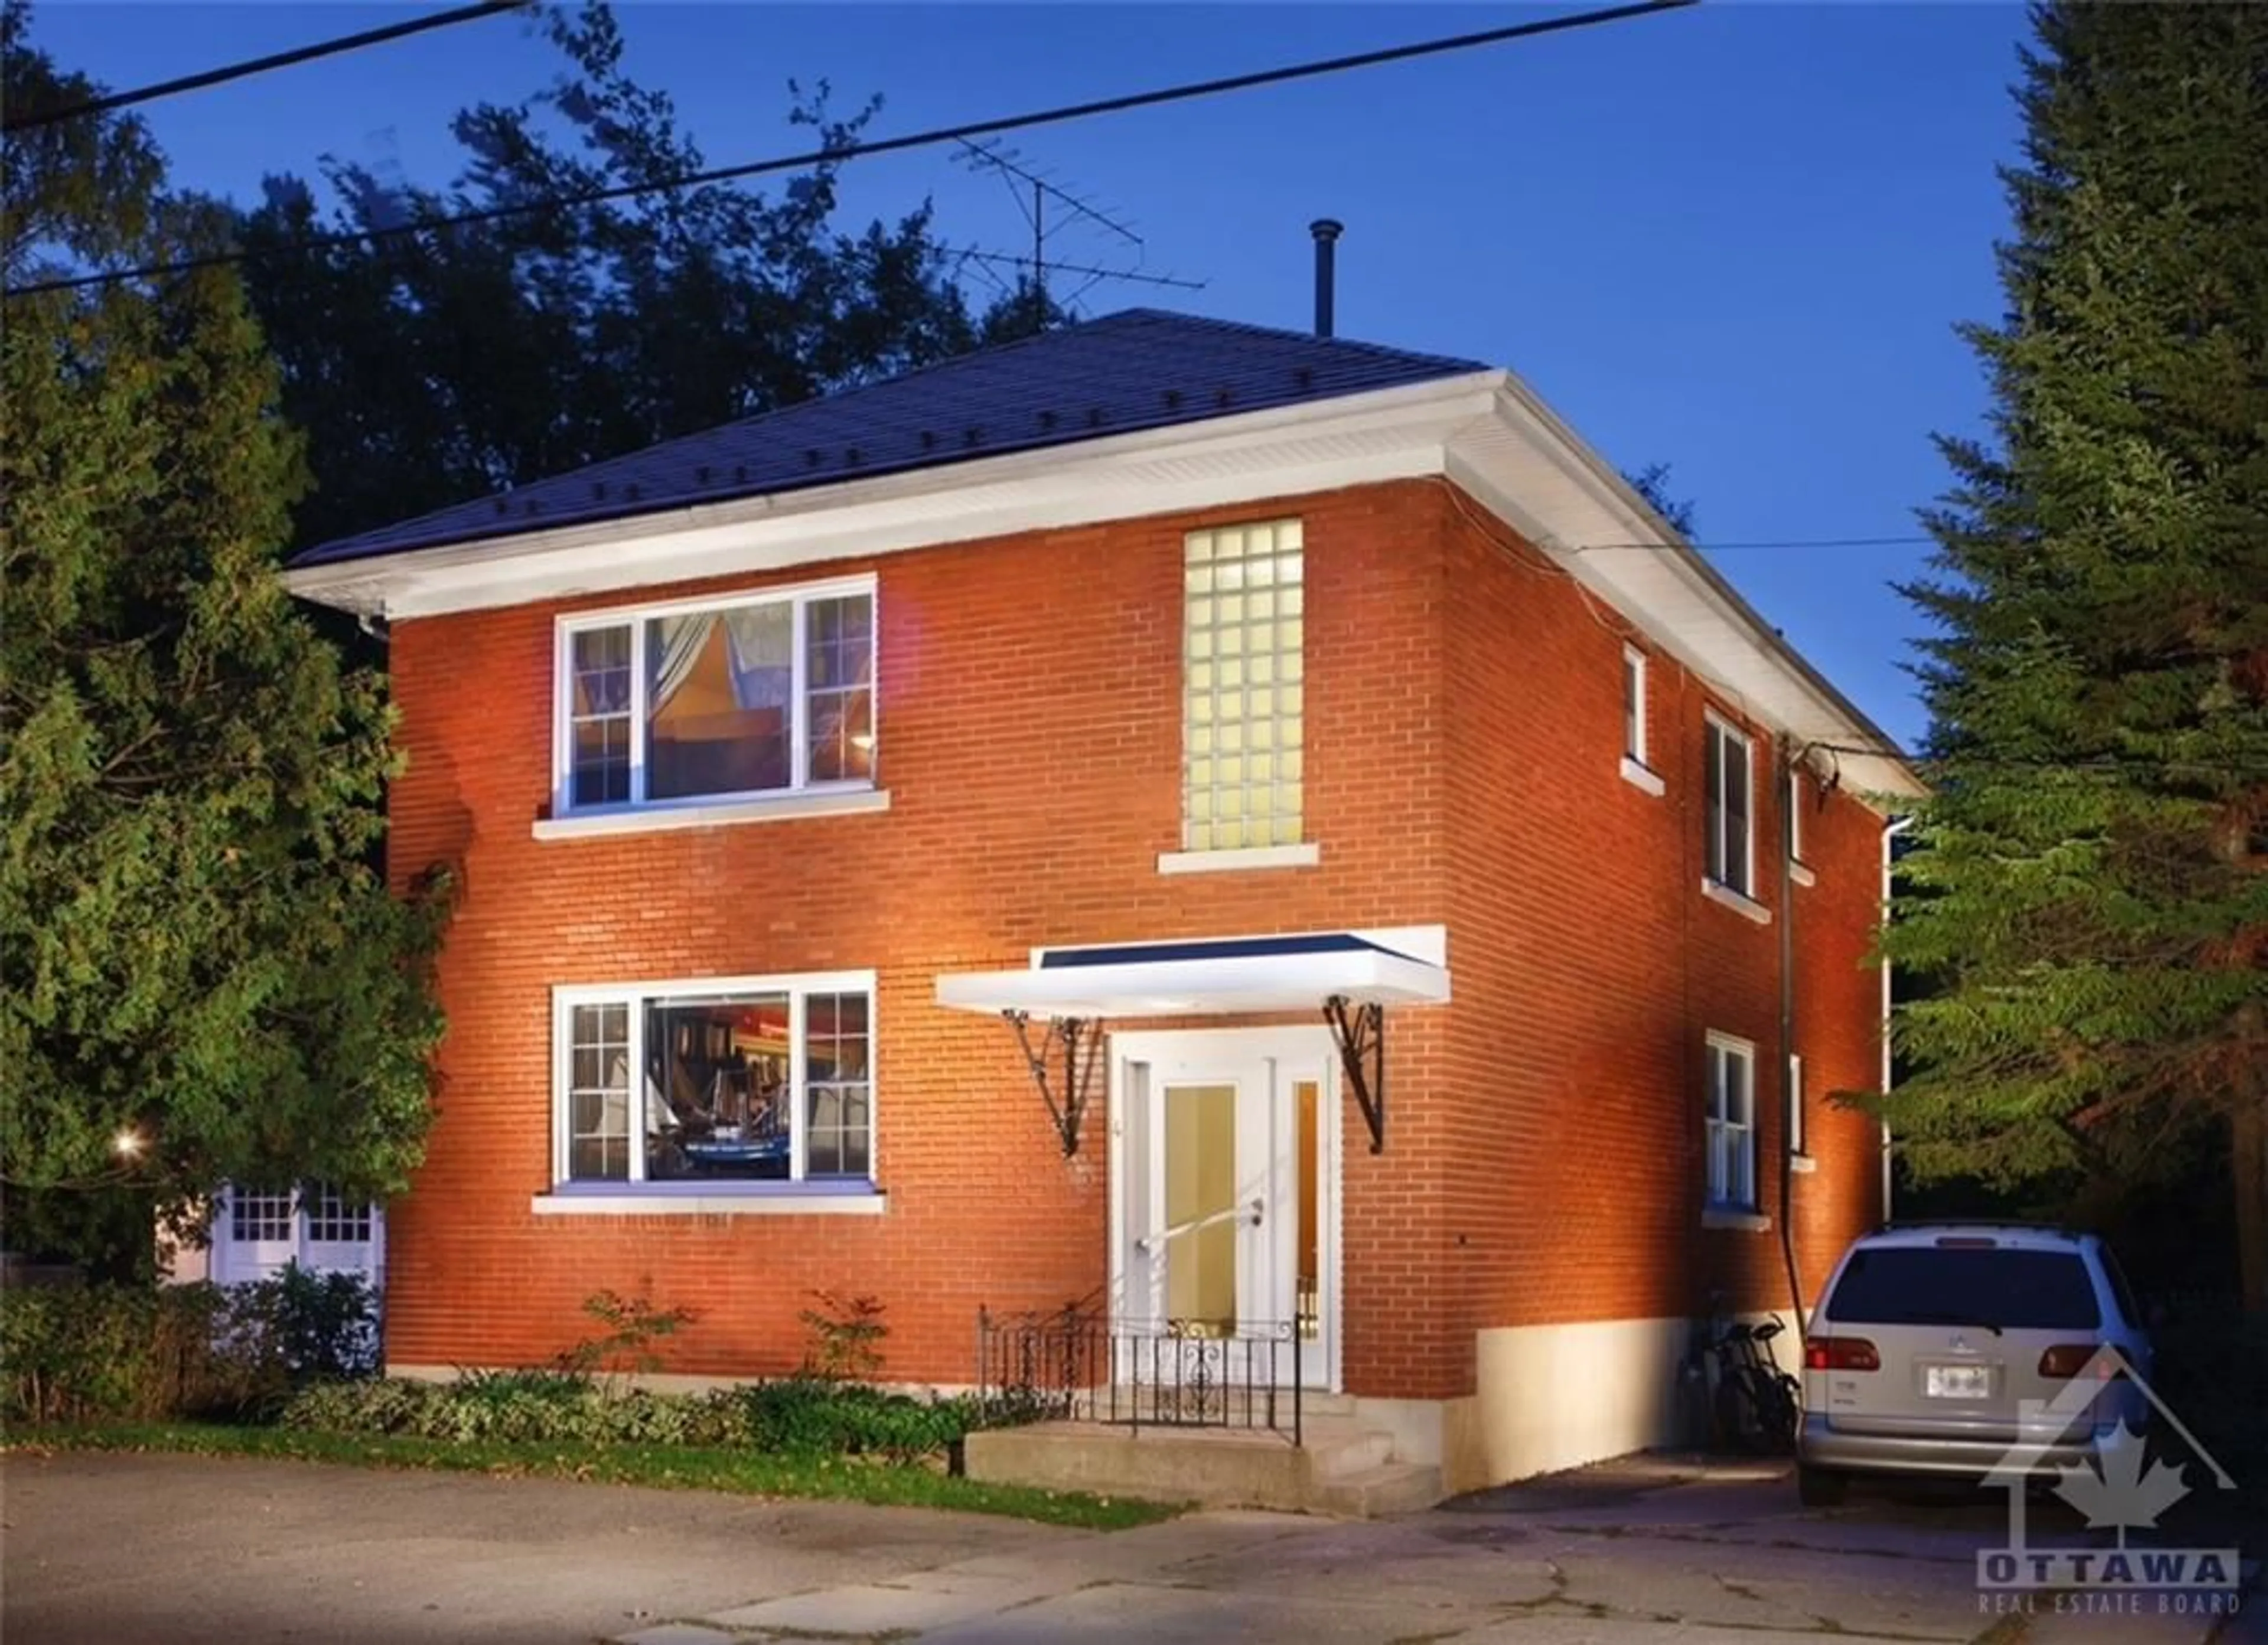 Home with brick exterior material for 4 MARY St, Perth Ontario K7H 2X2